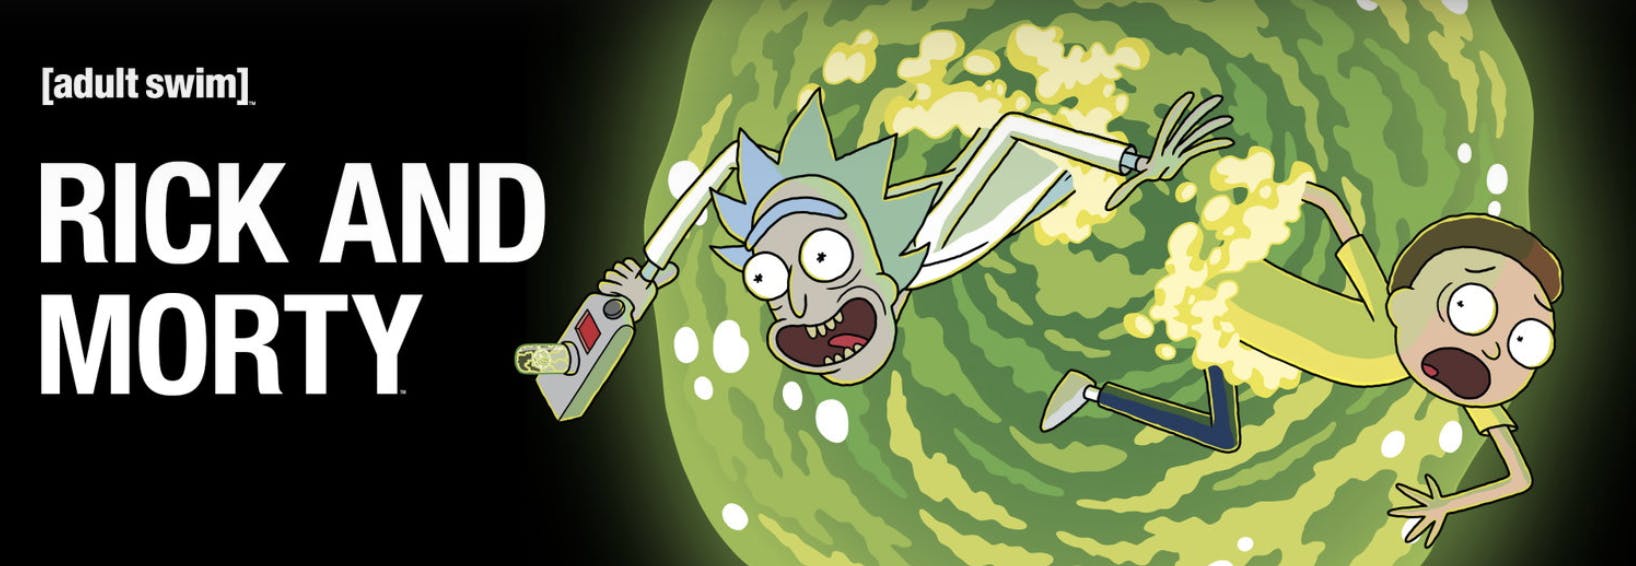 how to watch rick and morty online - hulu